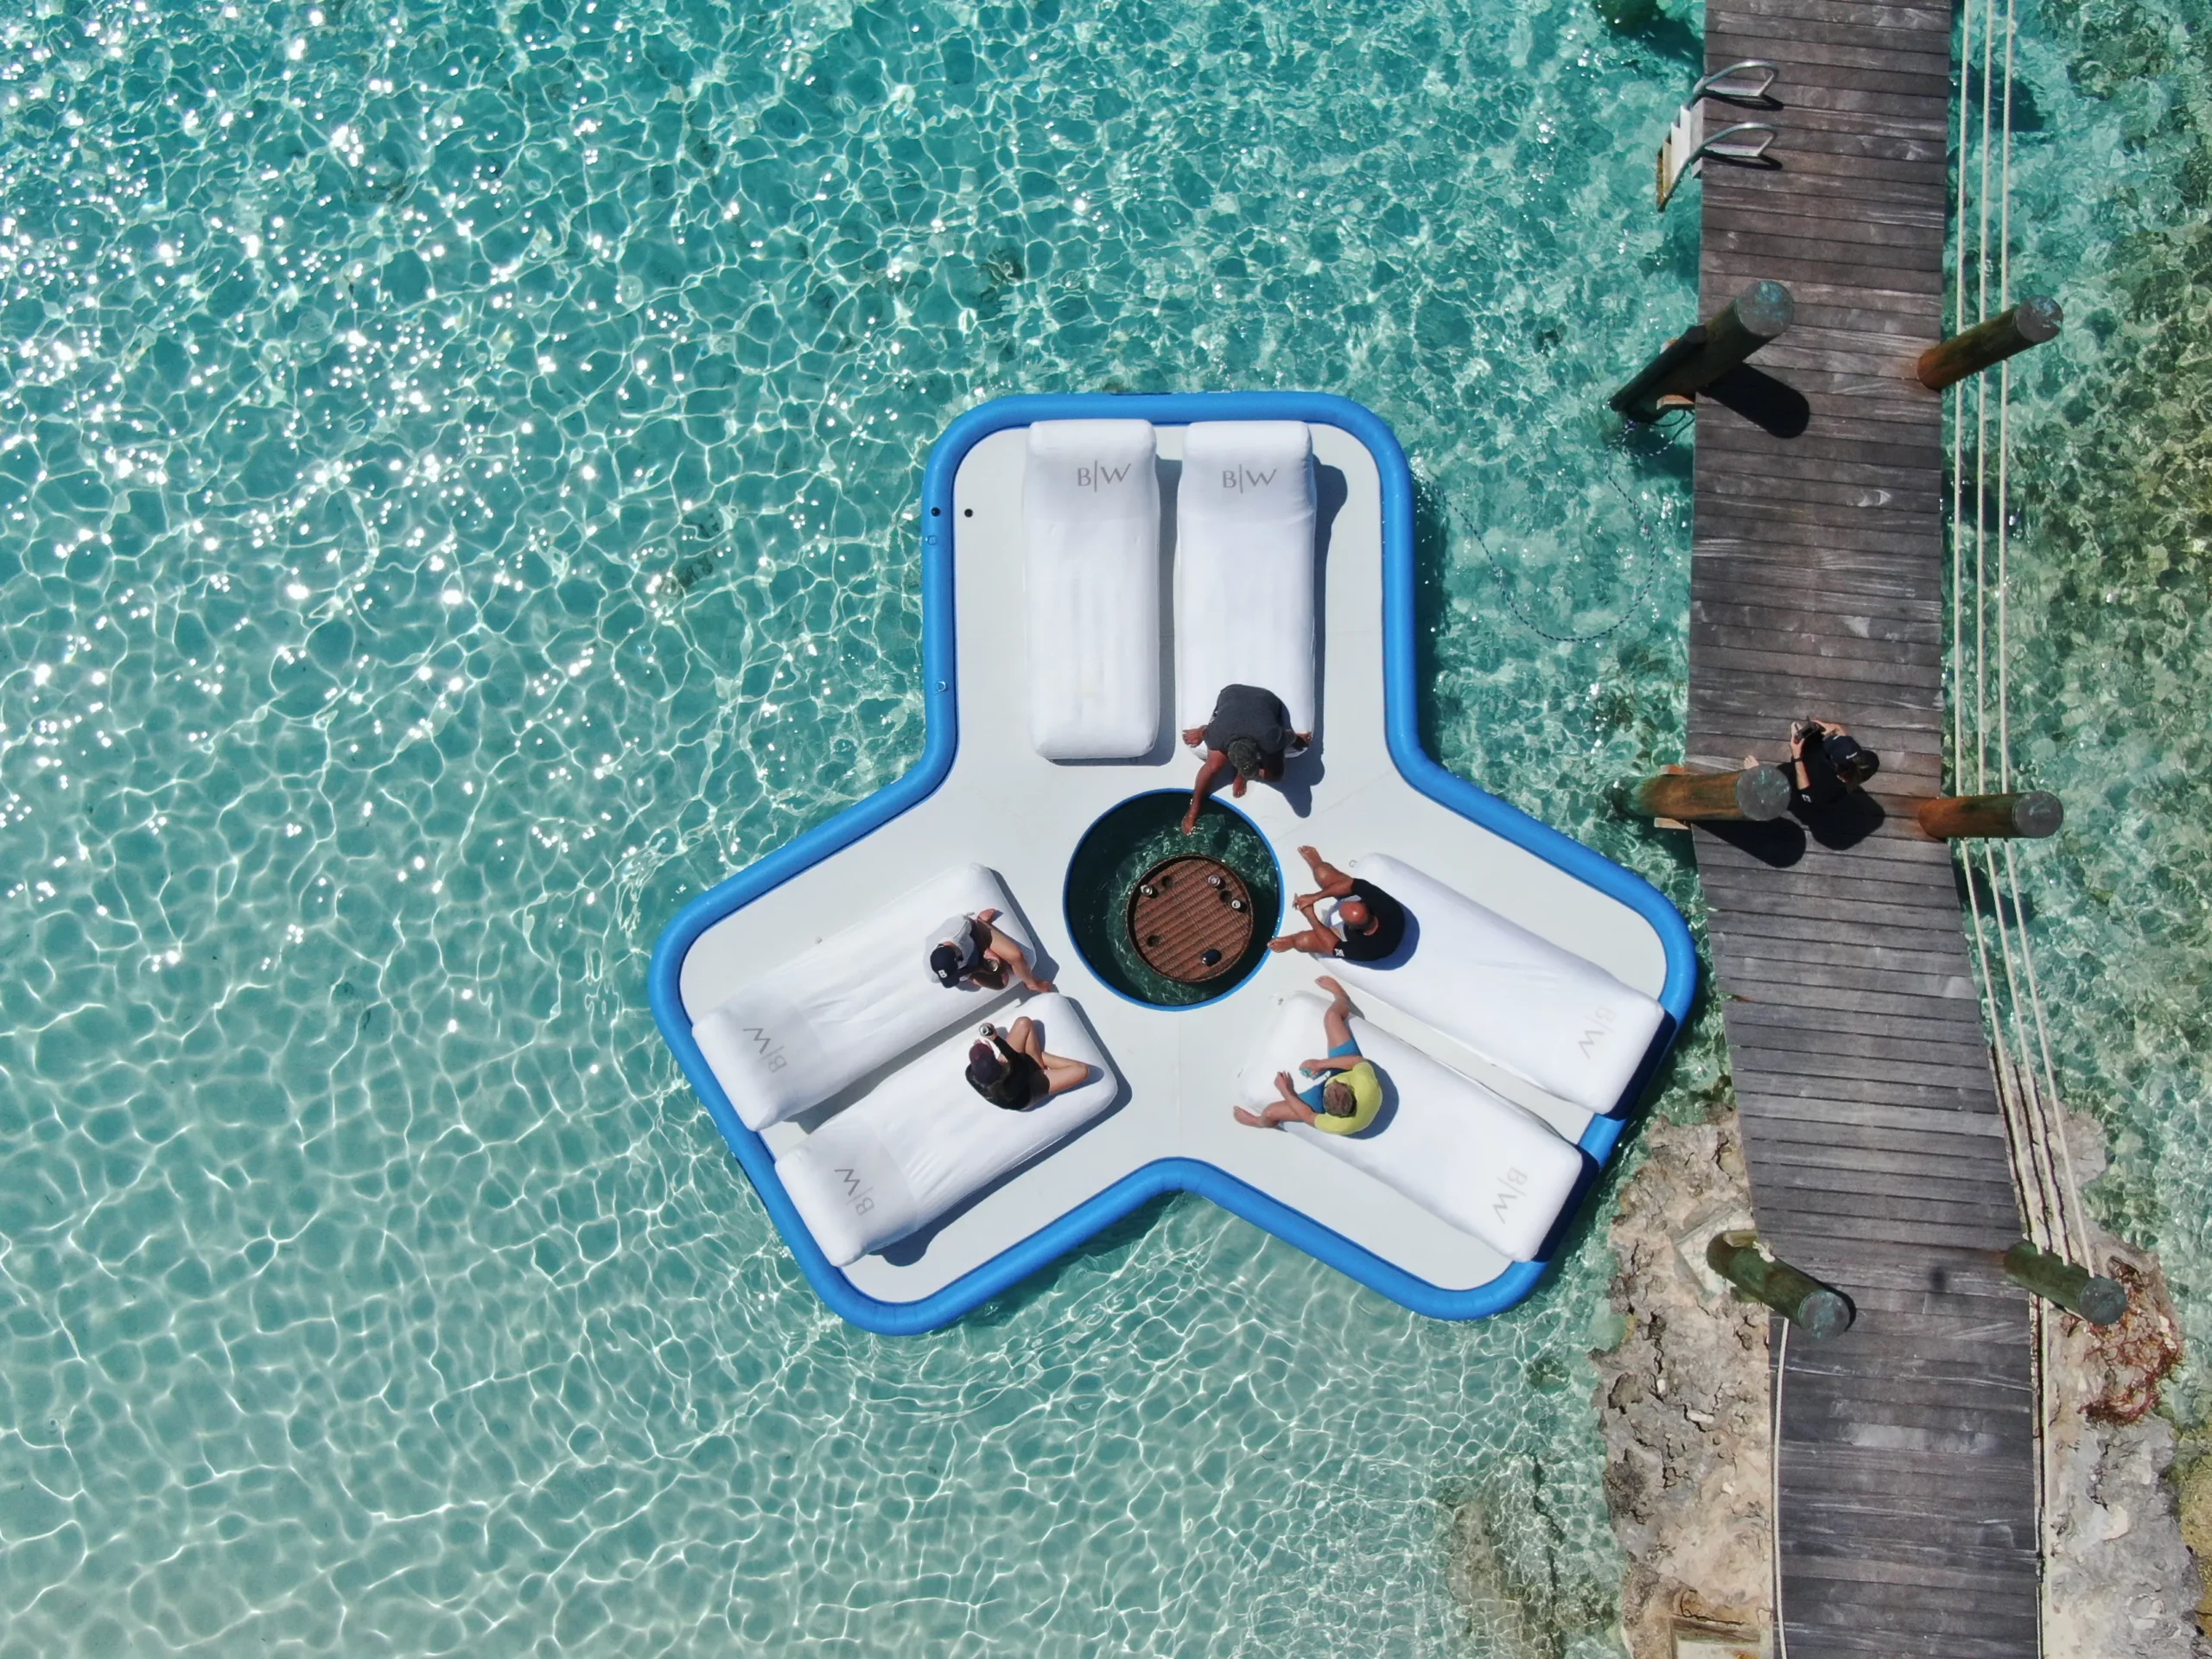 Superyacht charter guests on the Inflatable Floating Island from MY Broadwater